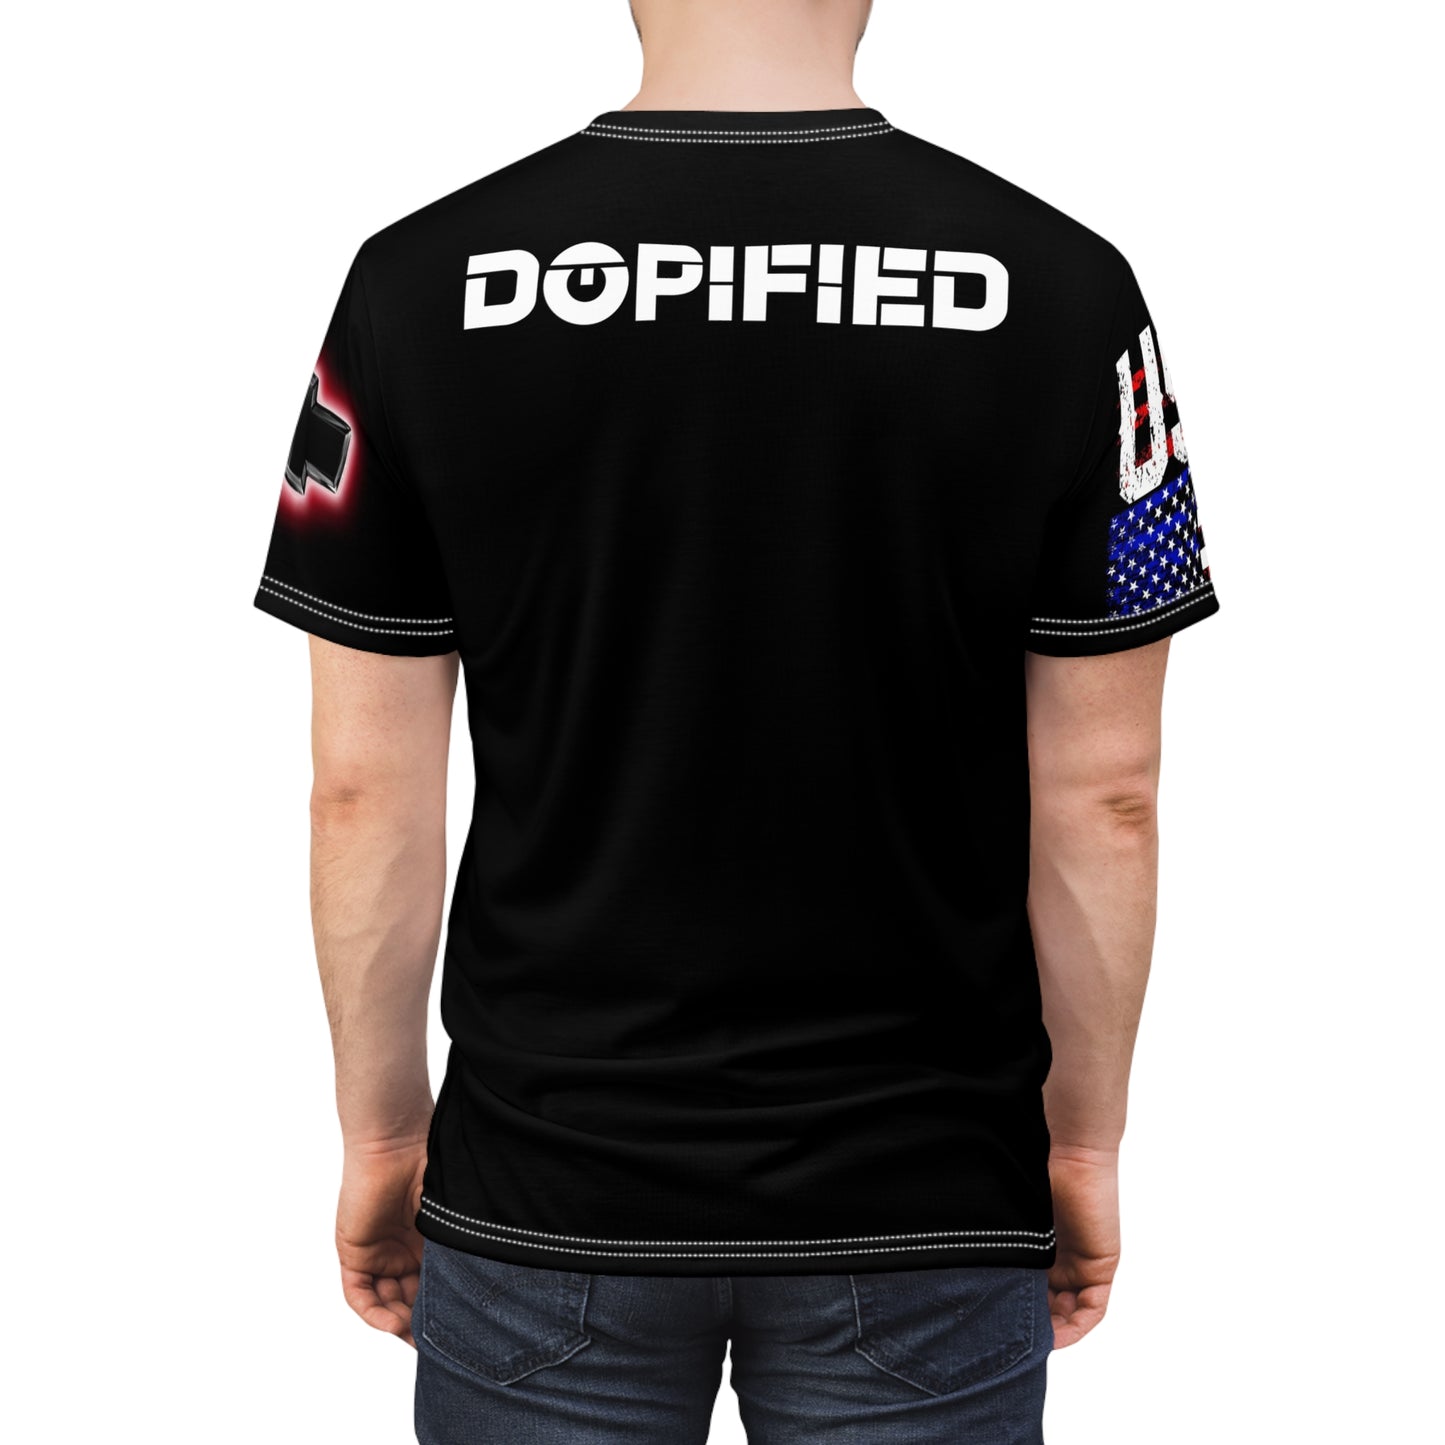 DOPiFiED Hooked On Freedom Unisex Cut & Sew Tee